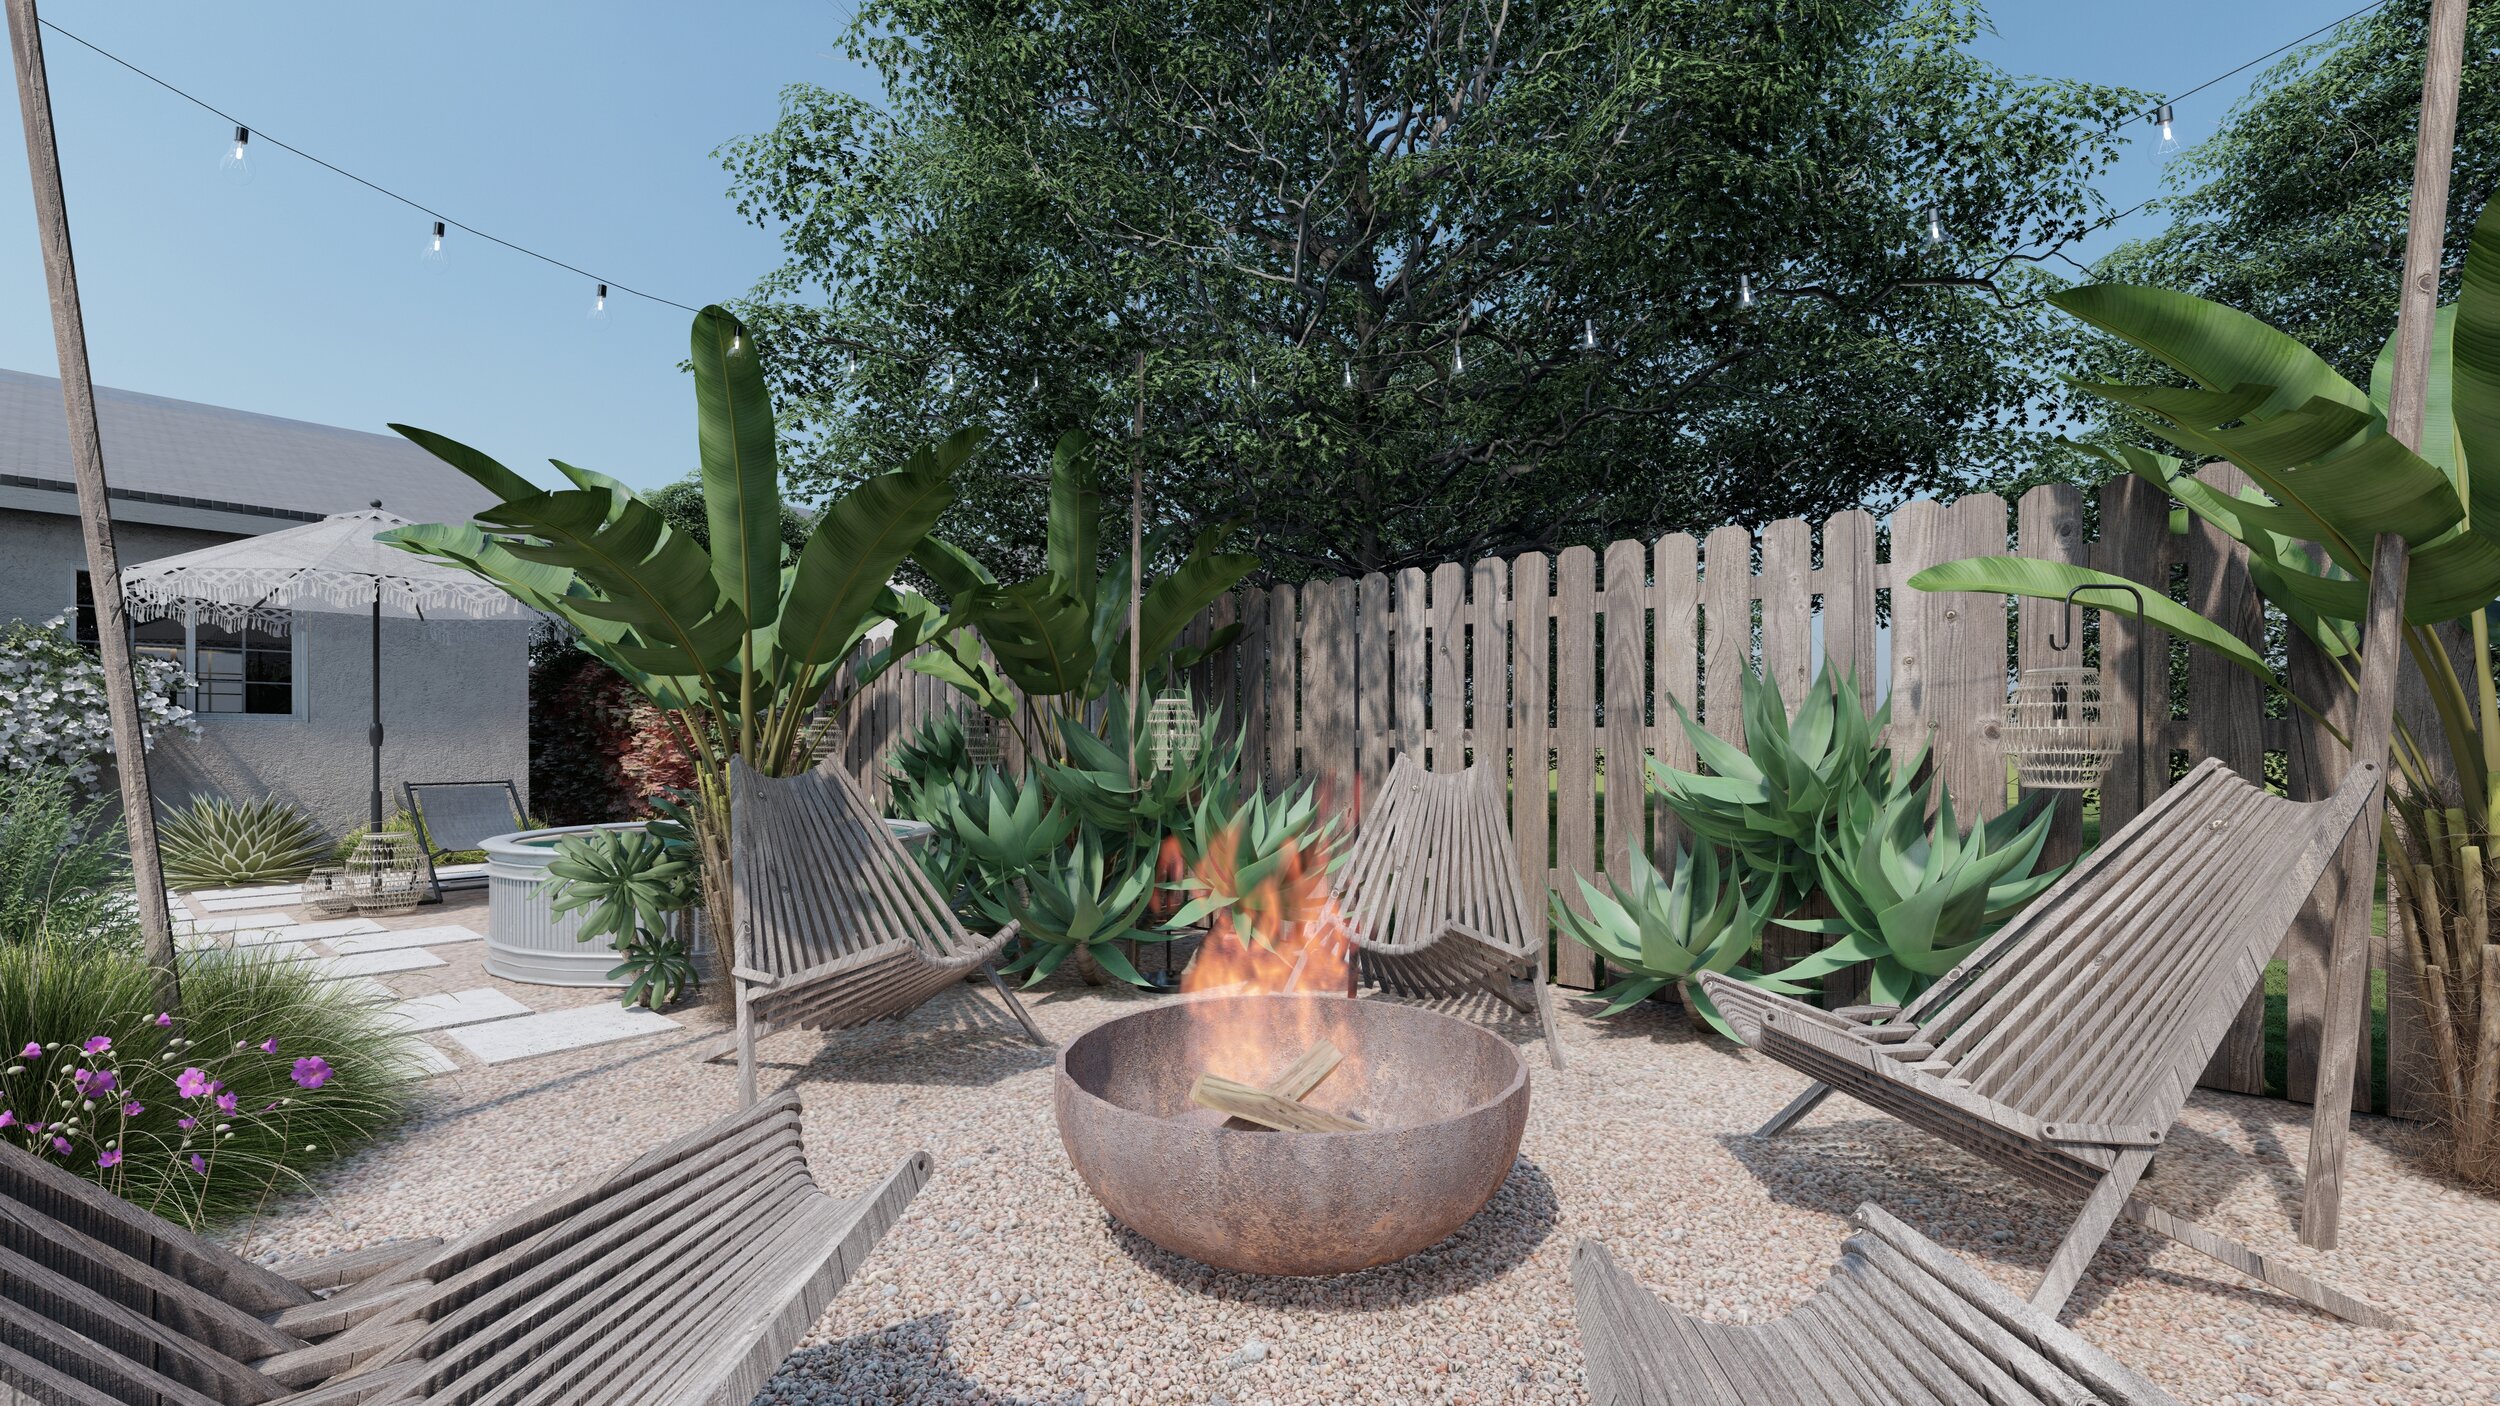 Casual tropical outdoor fire bowl area with privacy fence